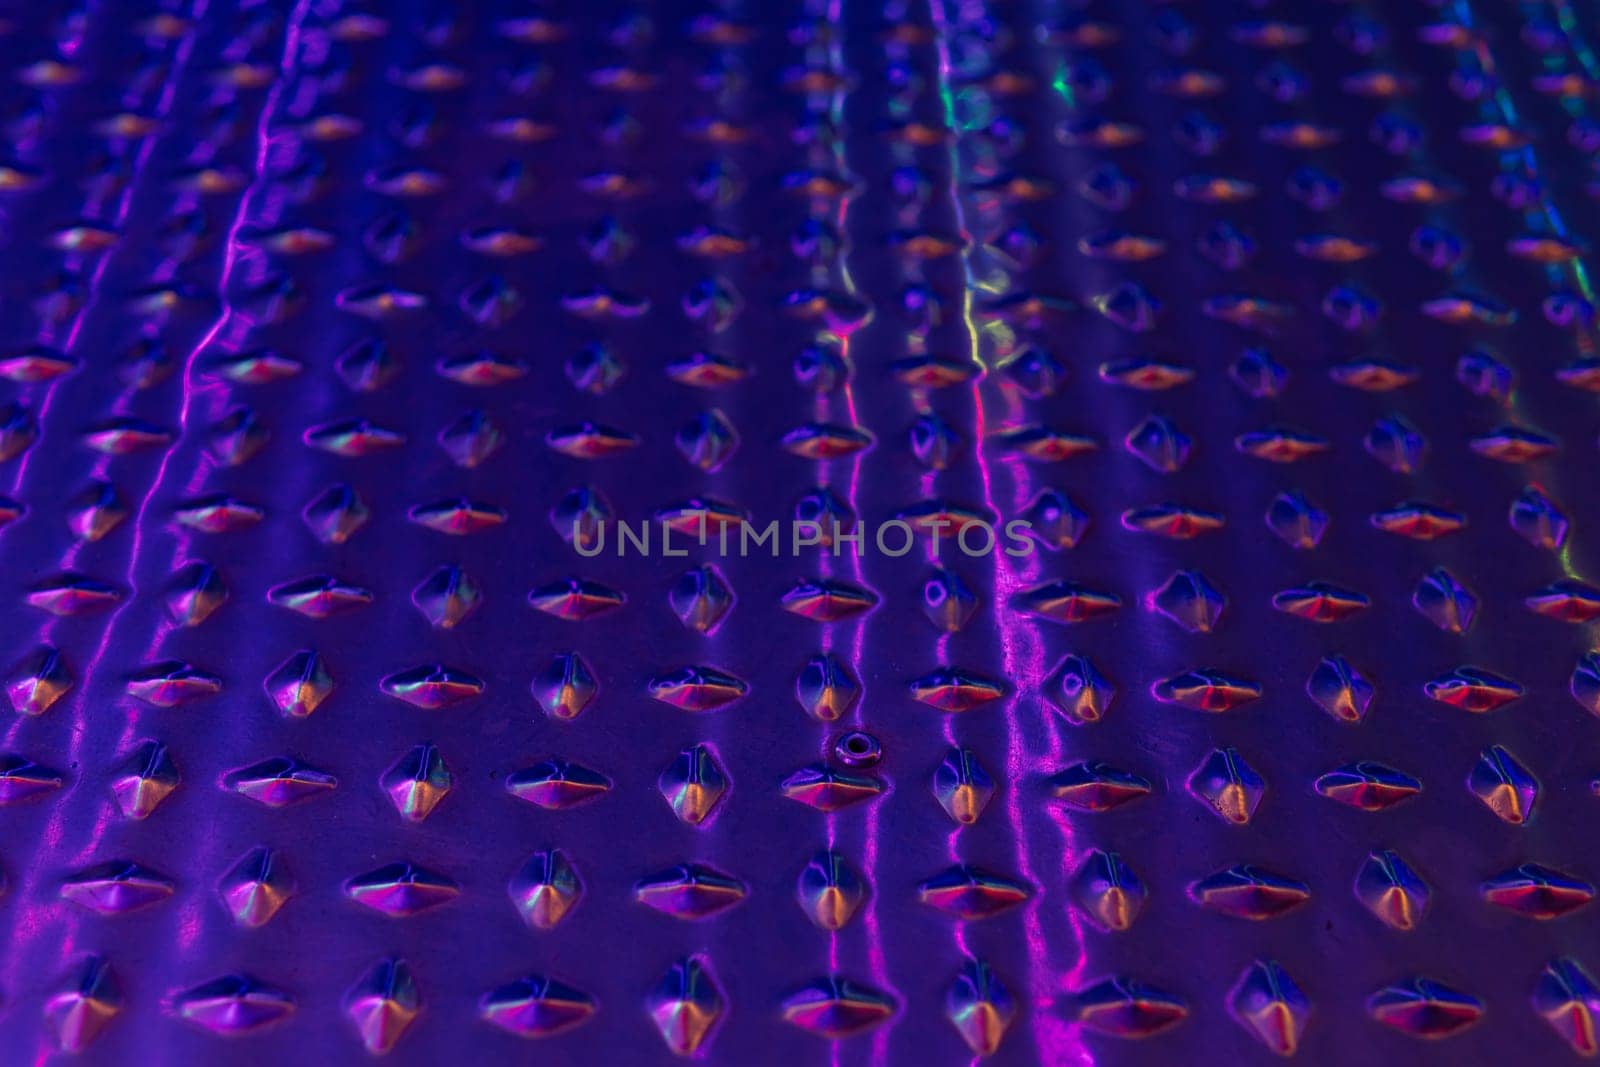 Abstract shiny purple texture surface background close up view by PopOff